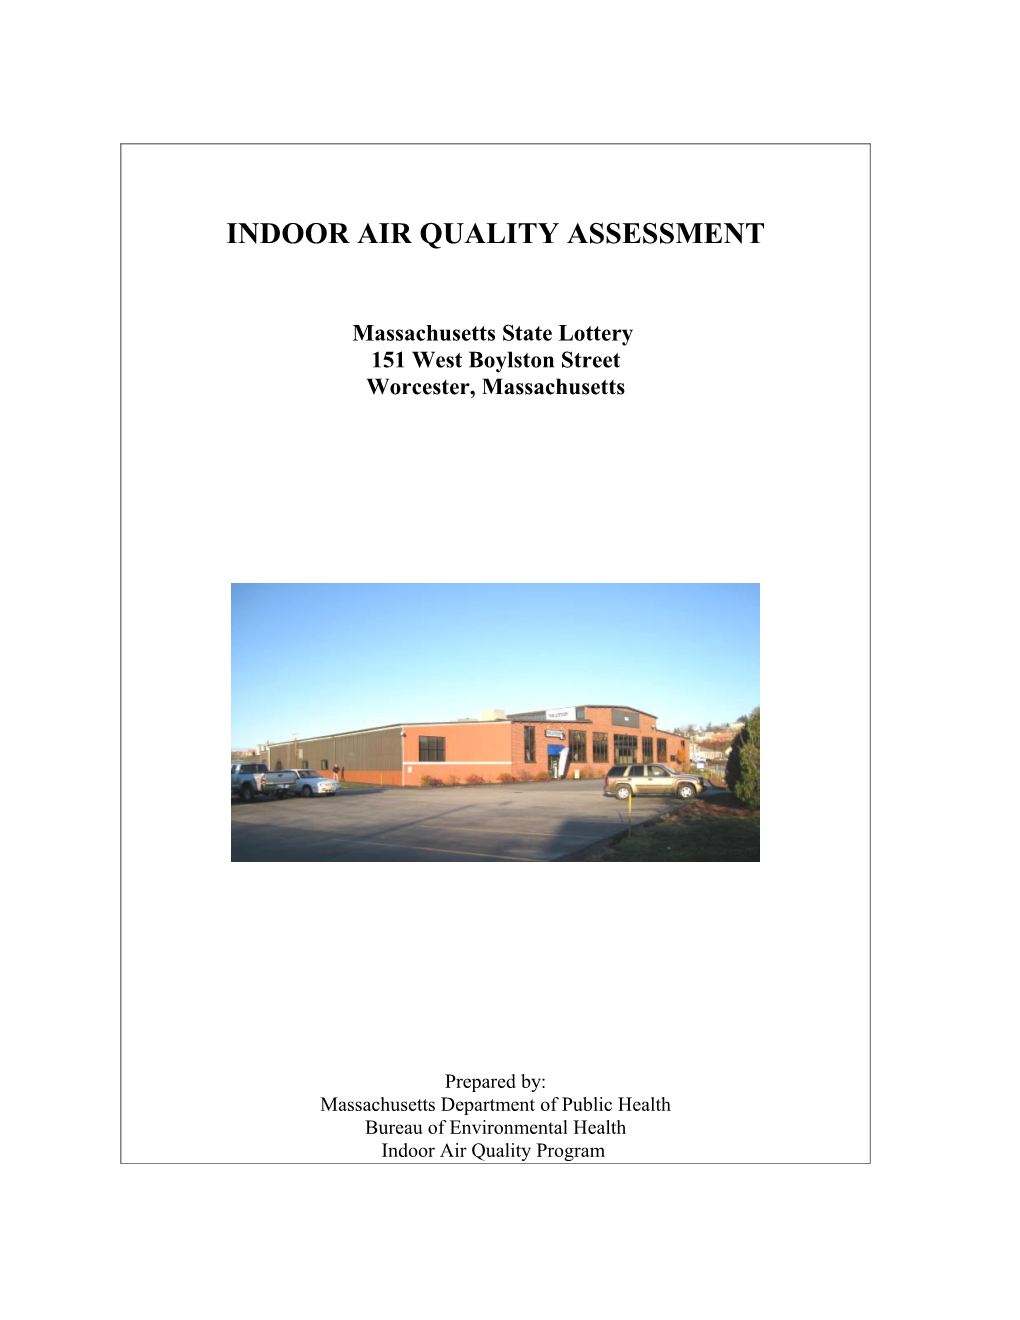 Indoor Air Quality Assessment s10